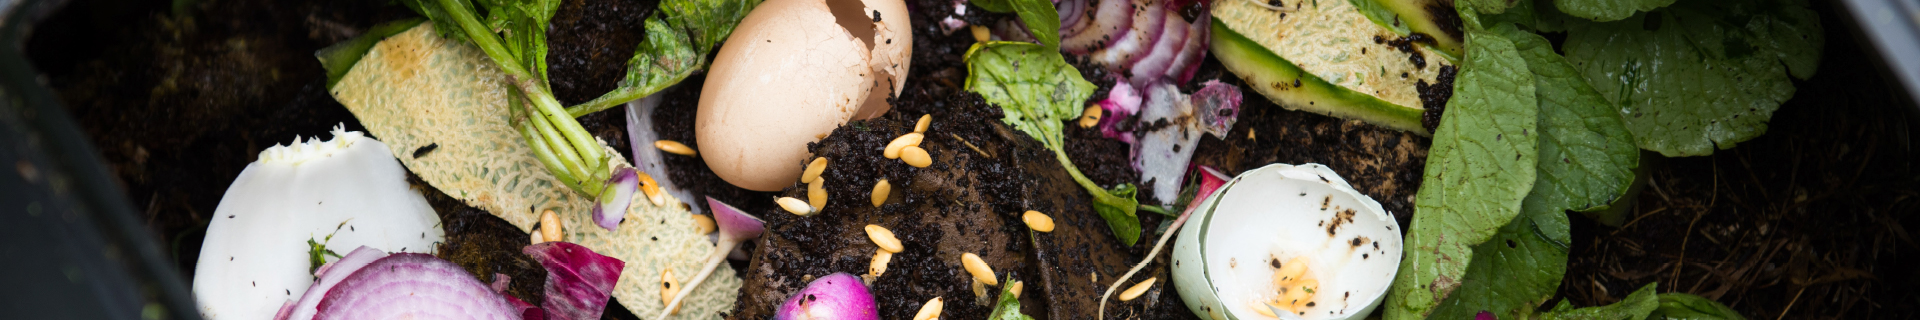 <p>A beginners guide on how to make compost at home</p>
